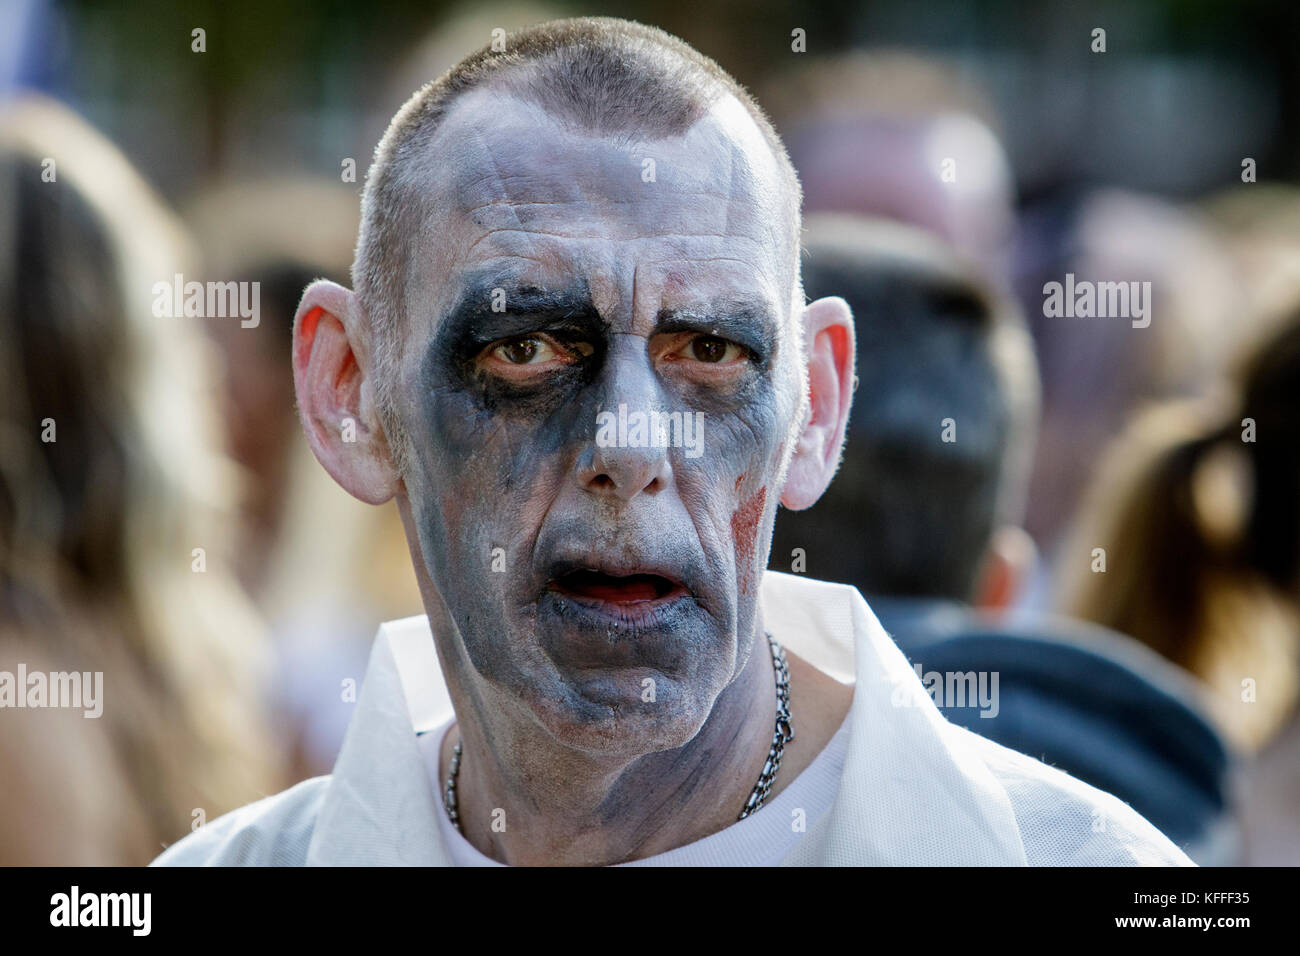 Bristol, UK. 28th Oct, 2017. A man dressed as zombies is pictured as he participate in a zombie walk through the city centre. Stock Photo